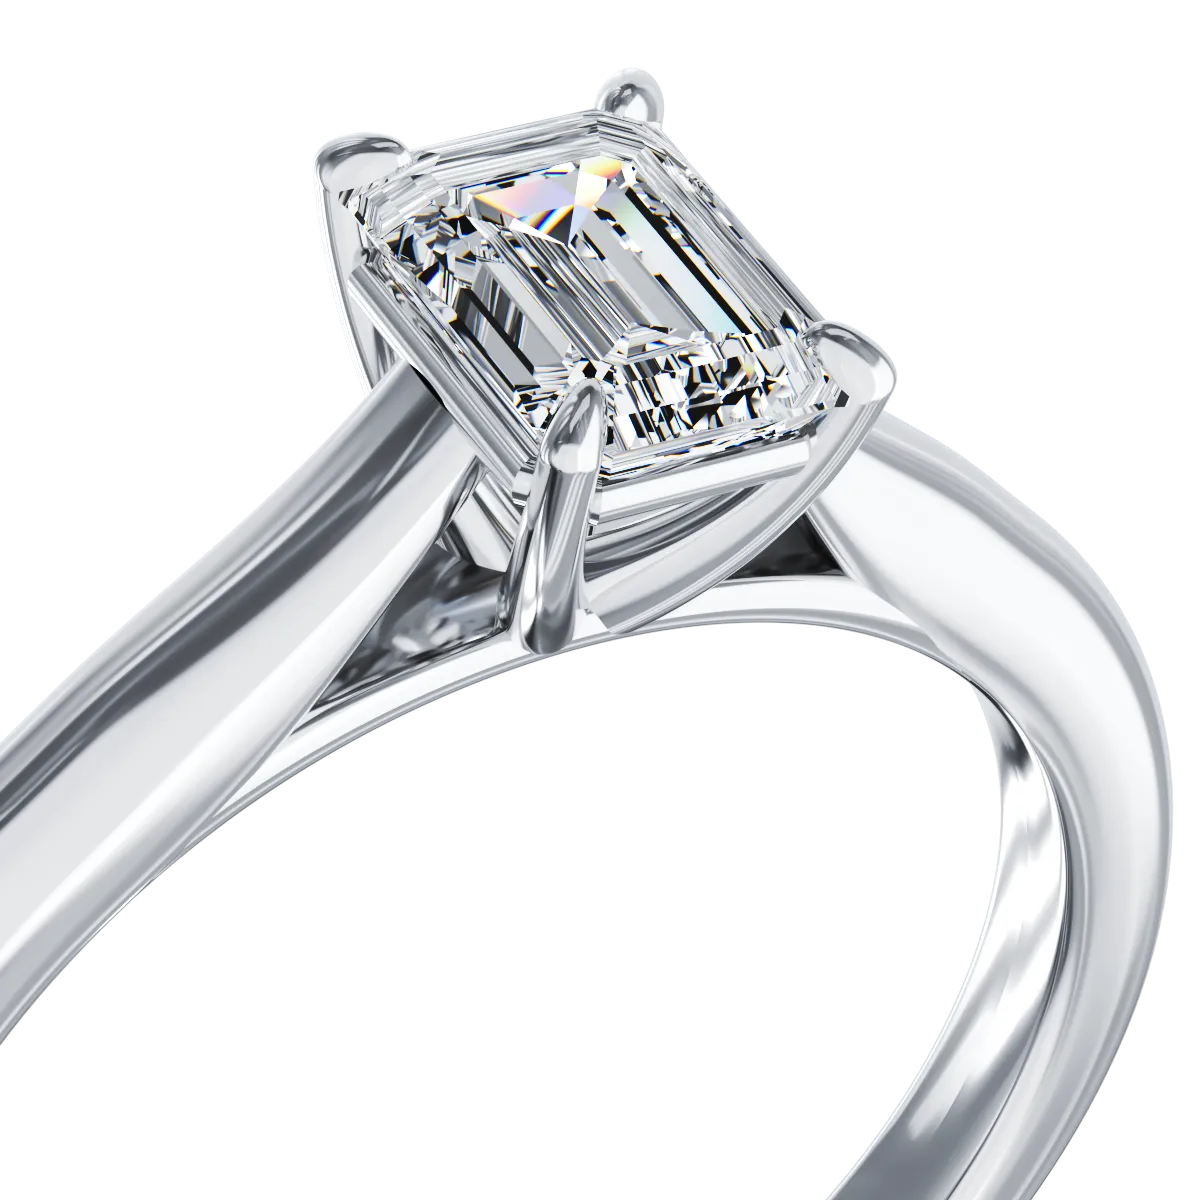 Platinum engagement ring with a 0.6ct solitaire diamond